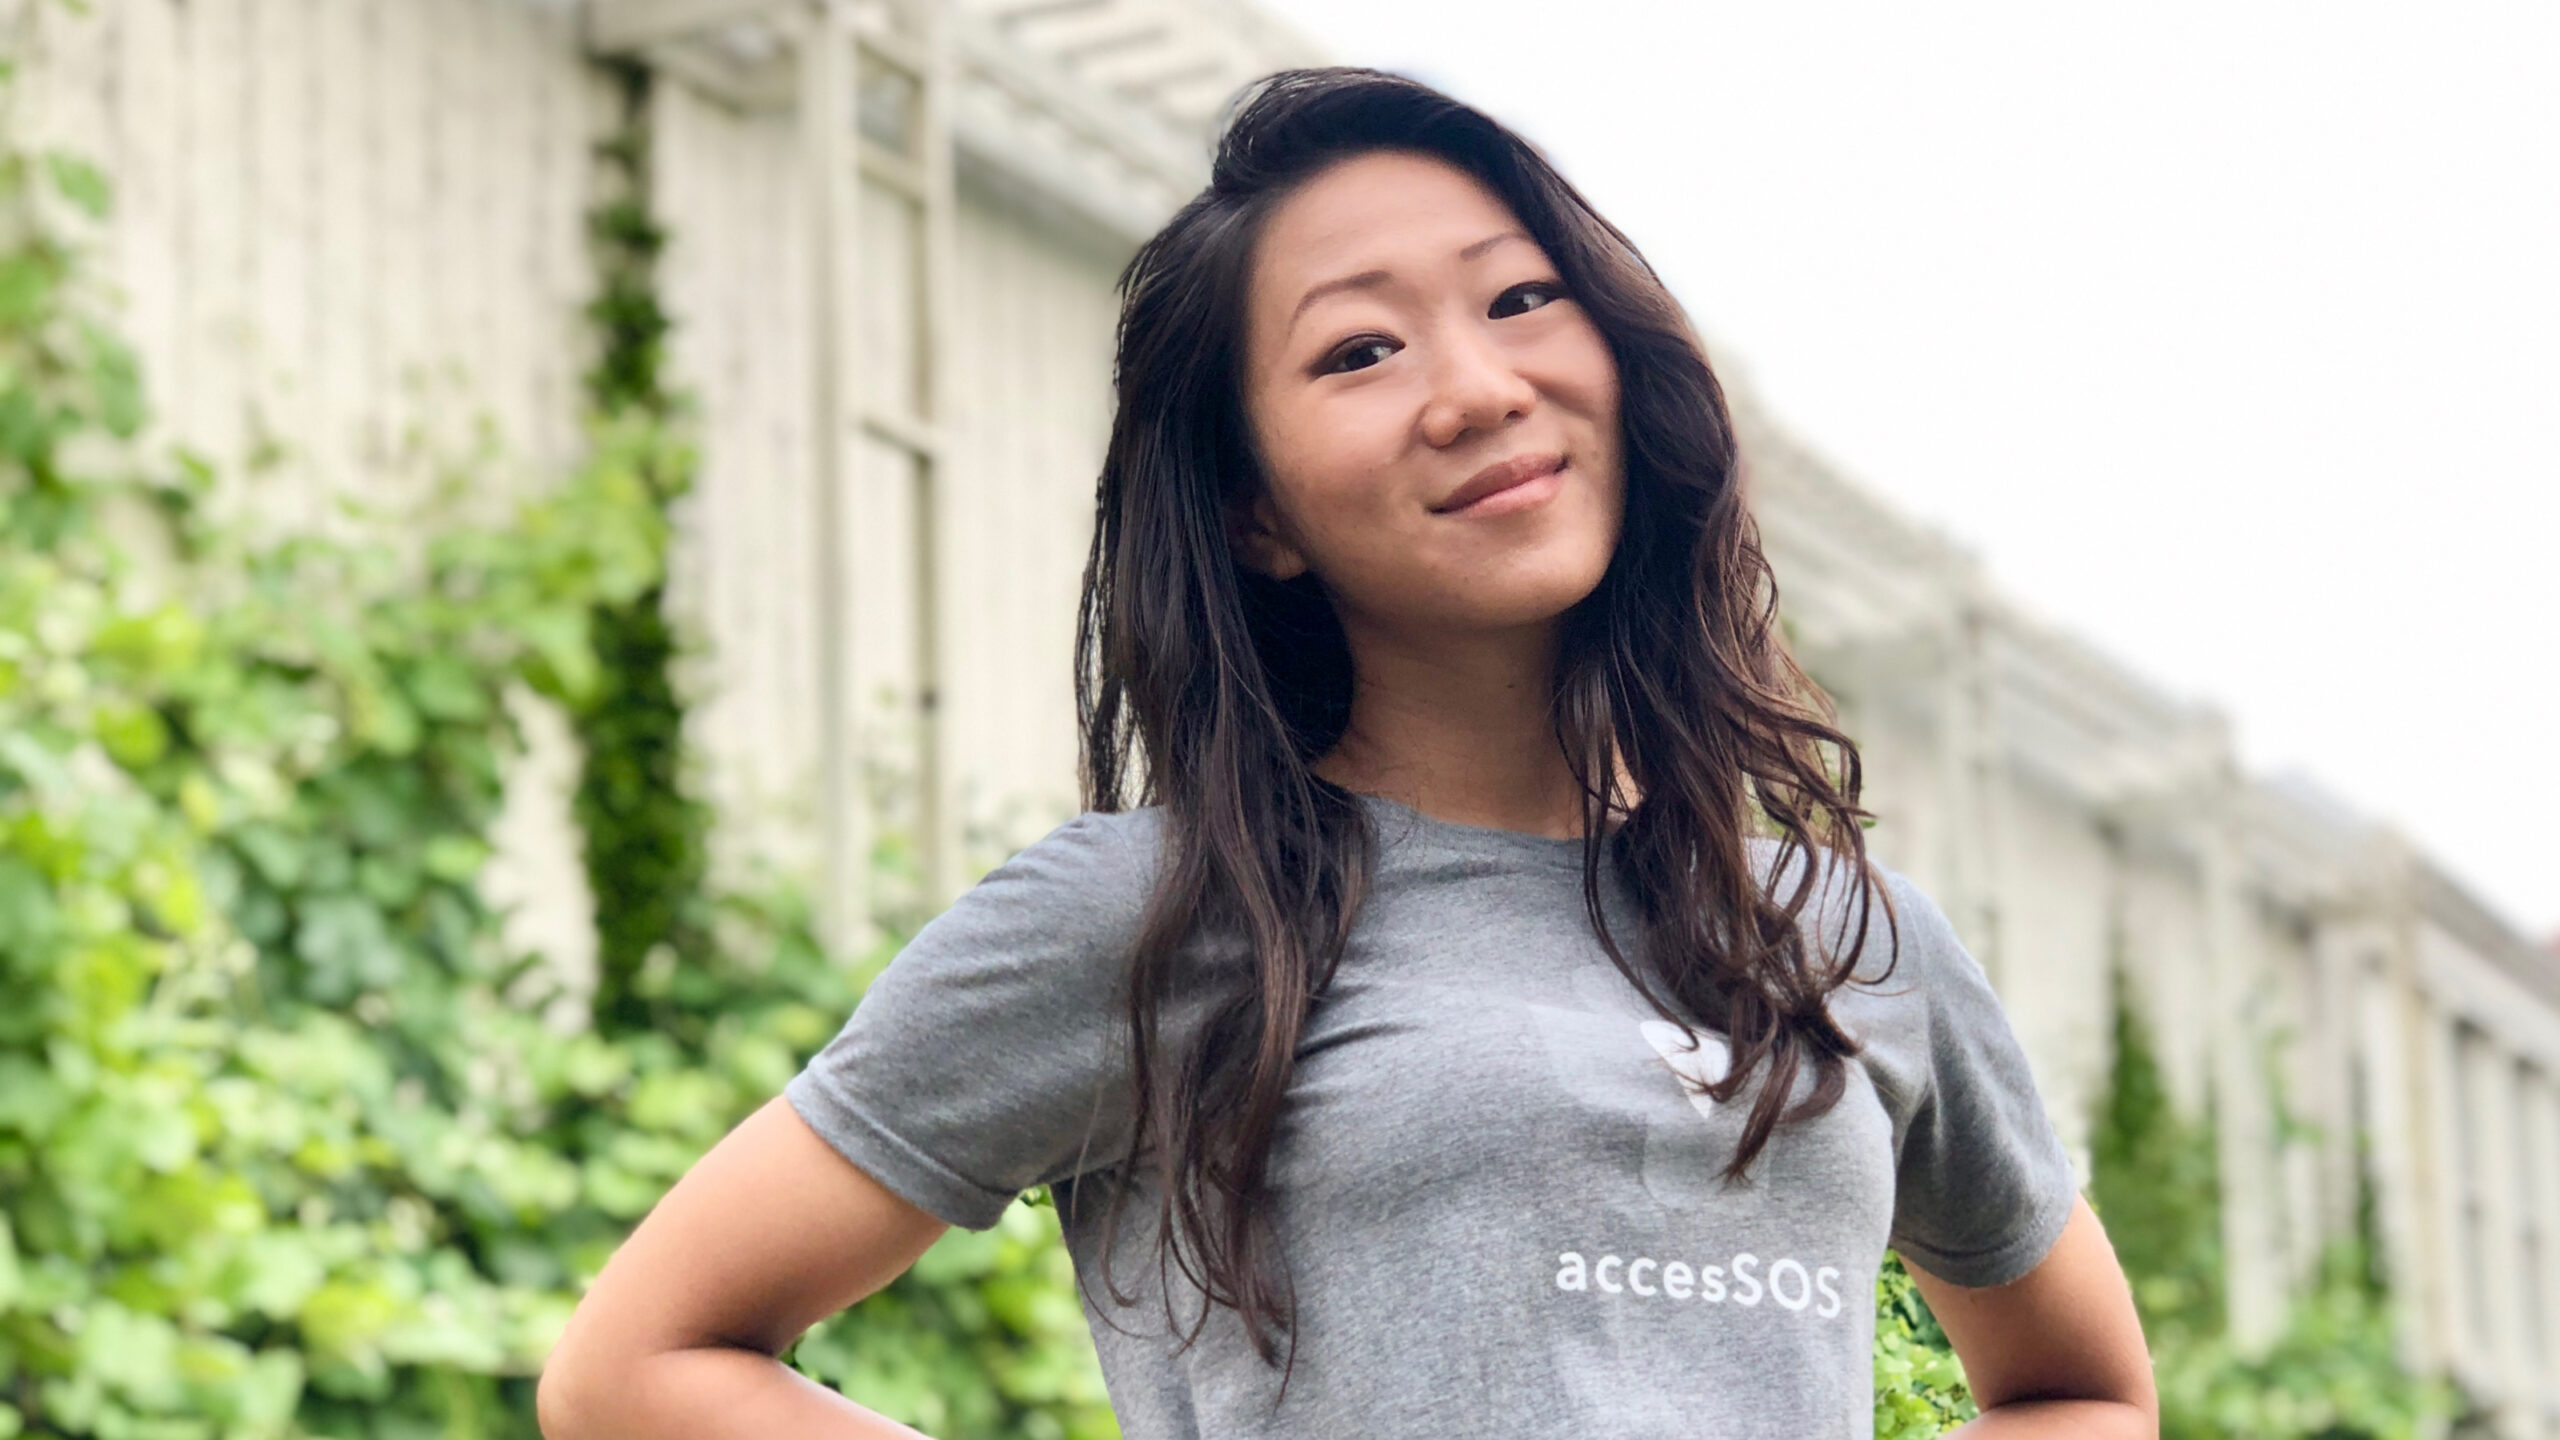 Gabriella Wong founder of accessSOS poses for a photo